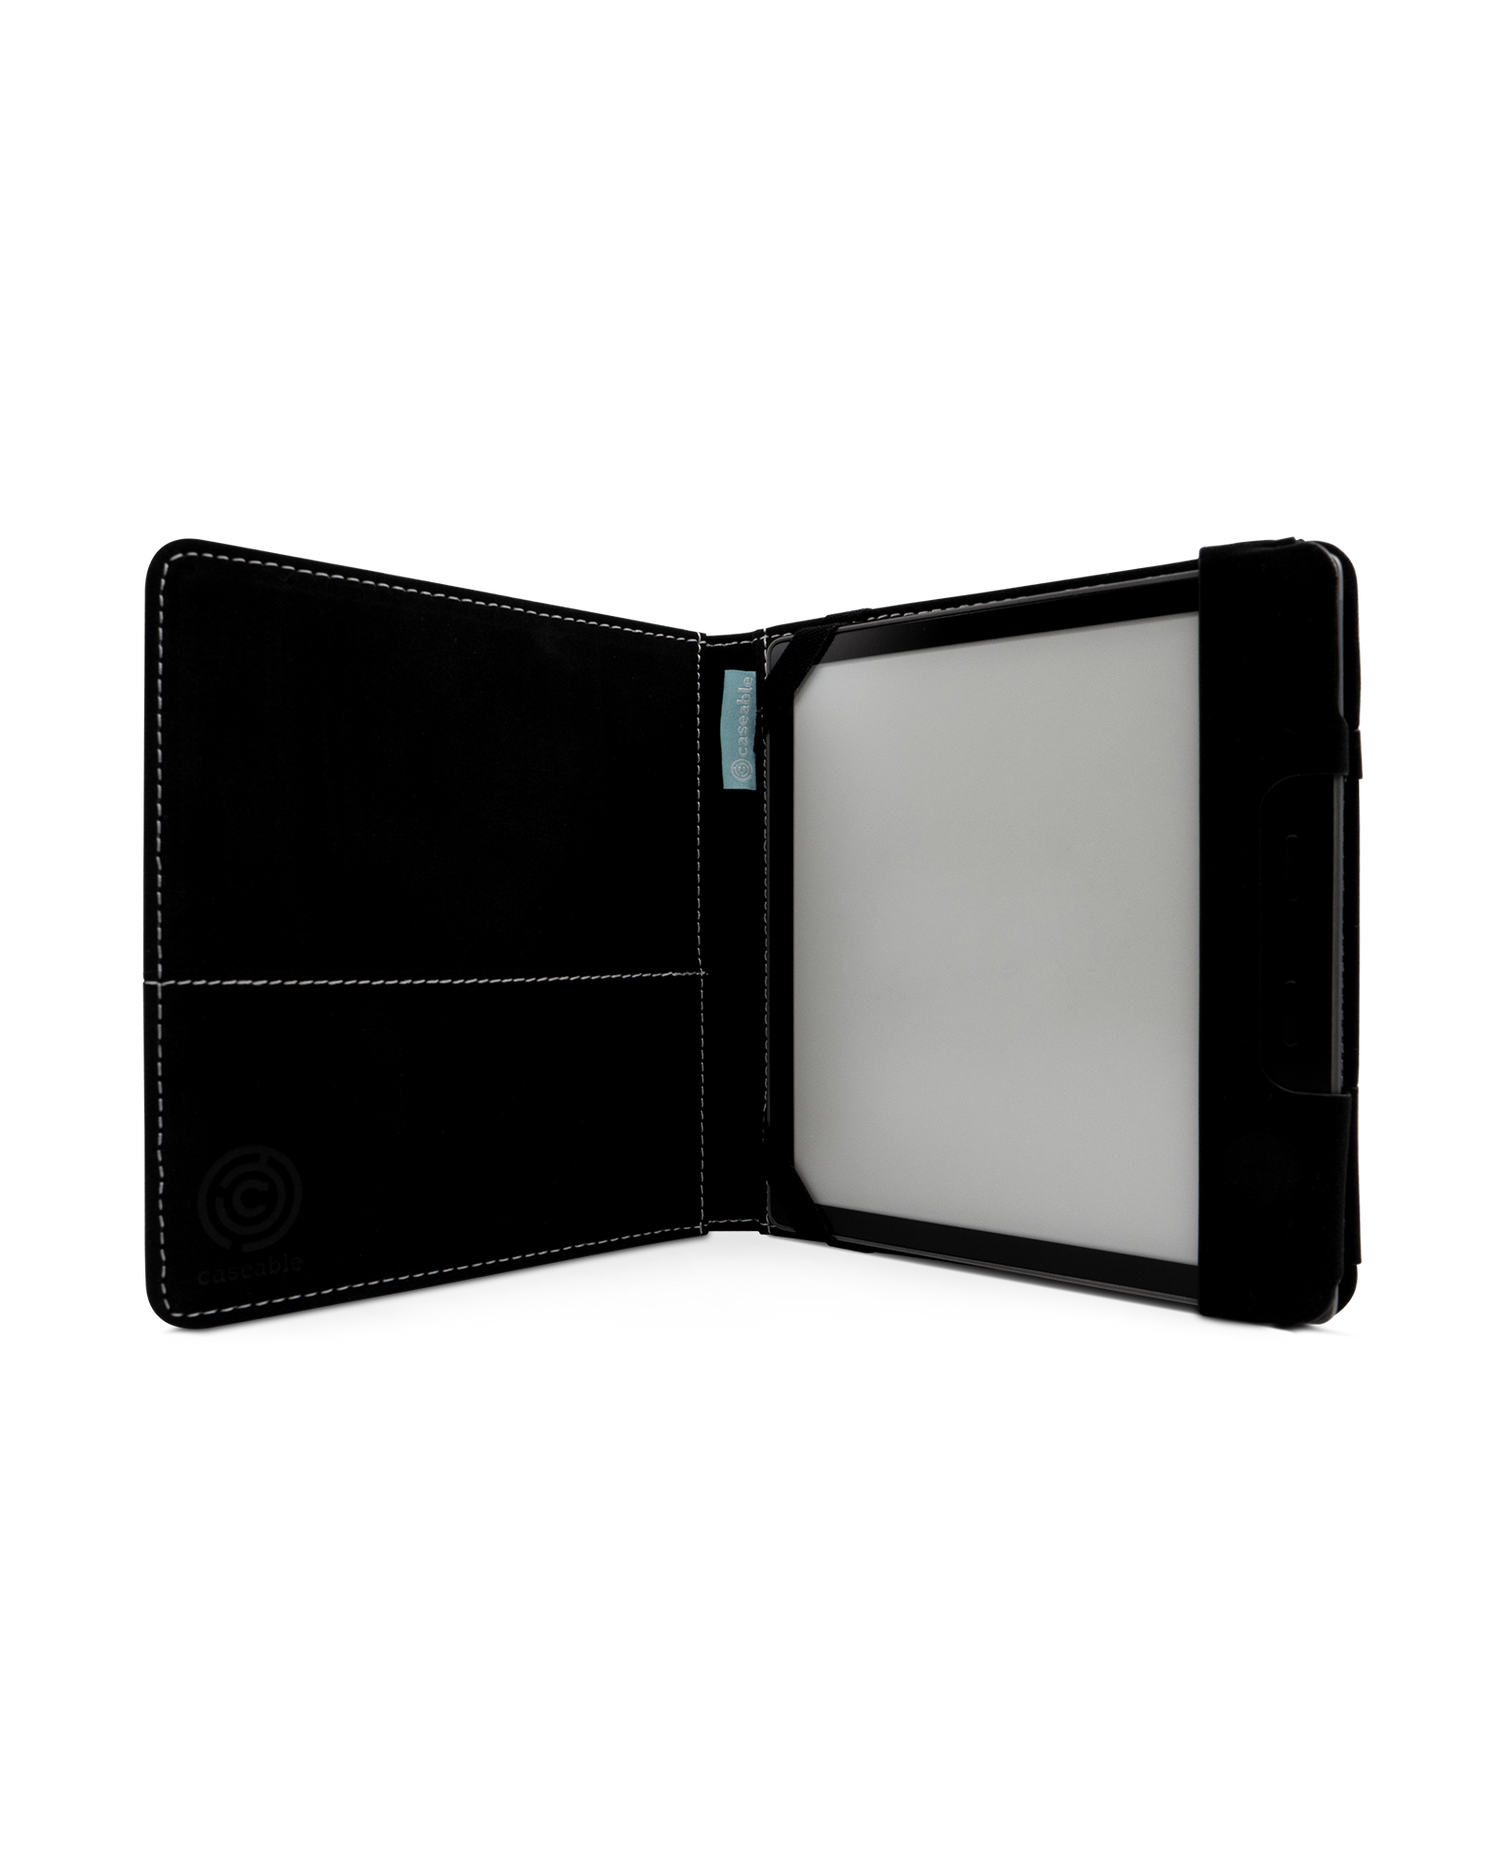 Marble Slice eReader Case for tolino vision 6: Opened interior view